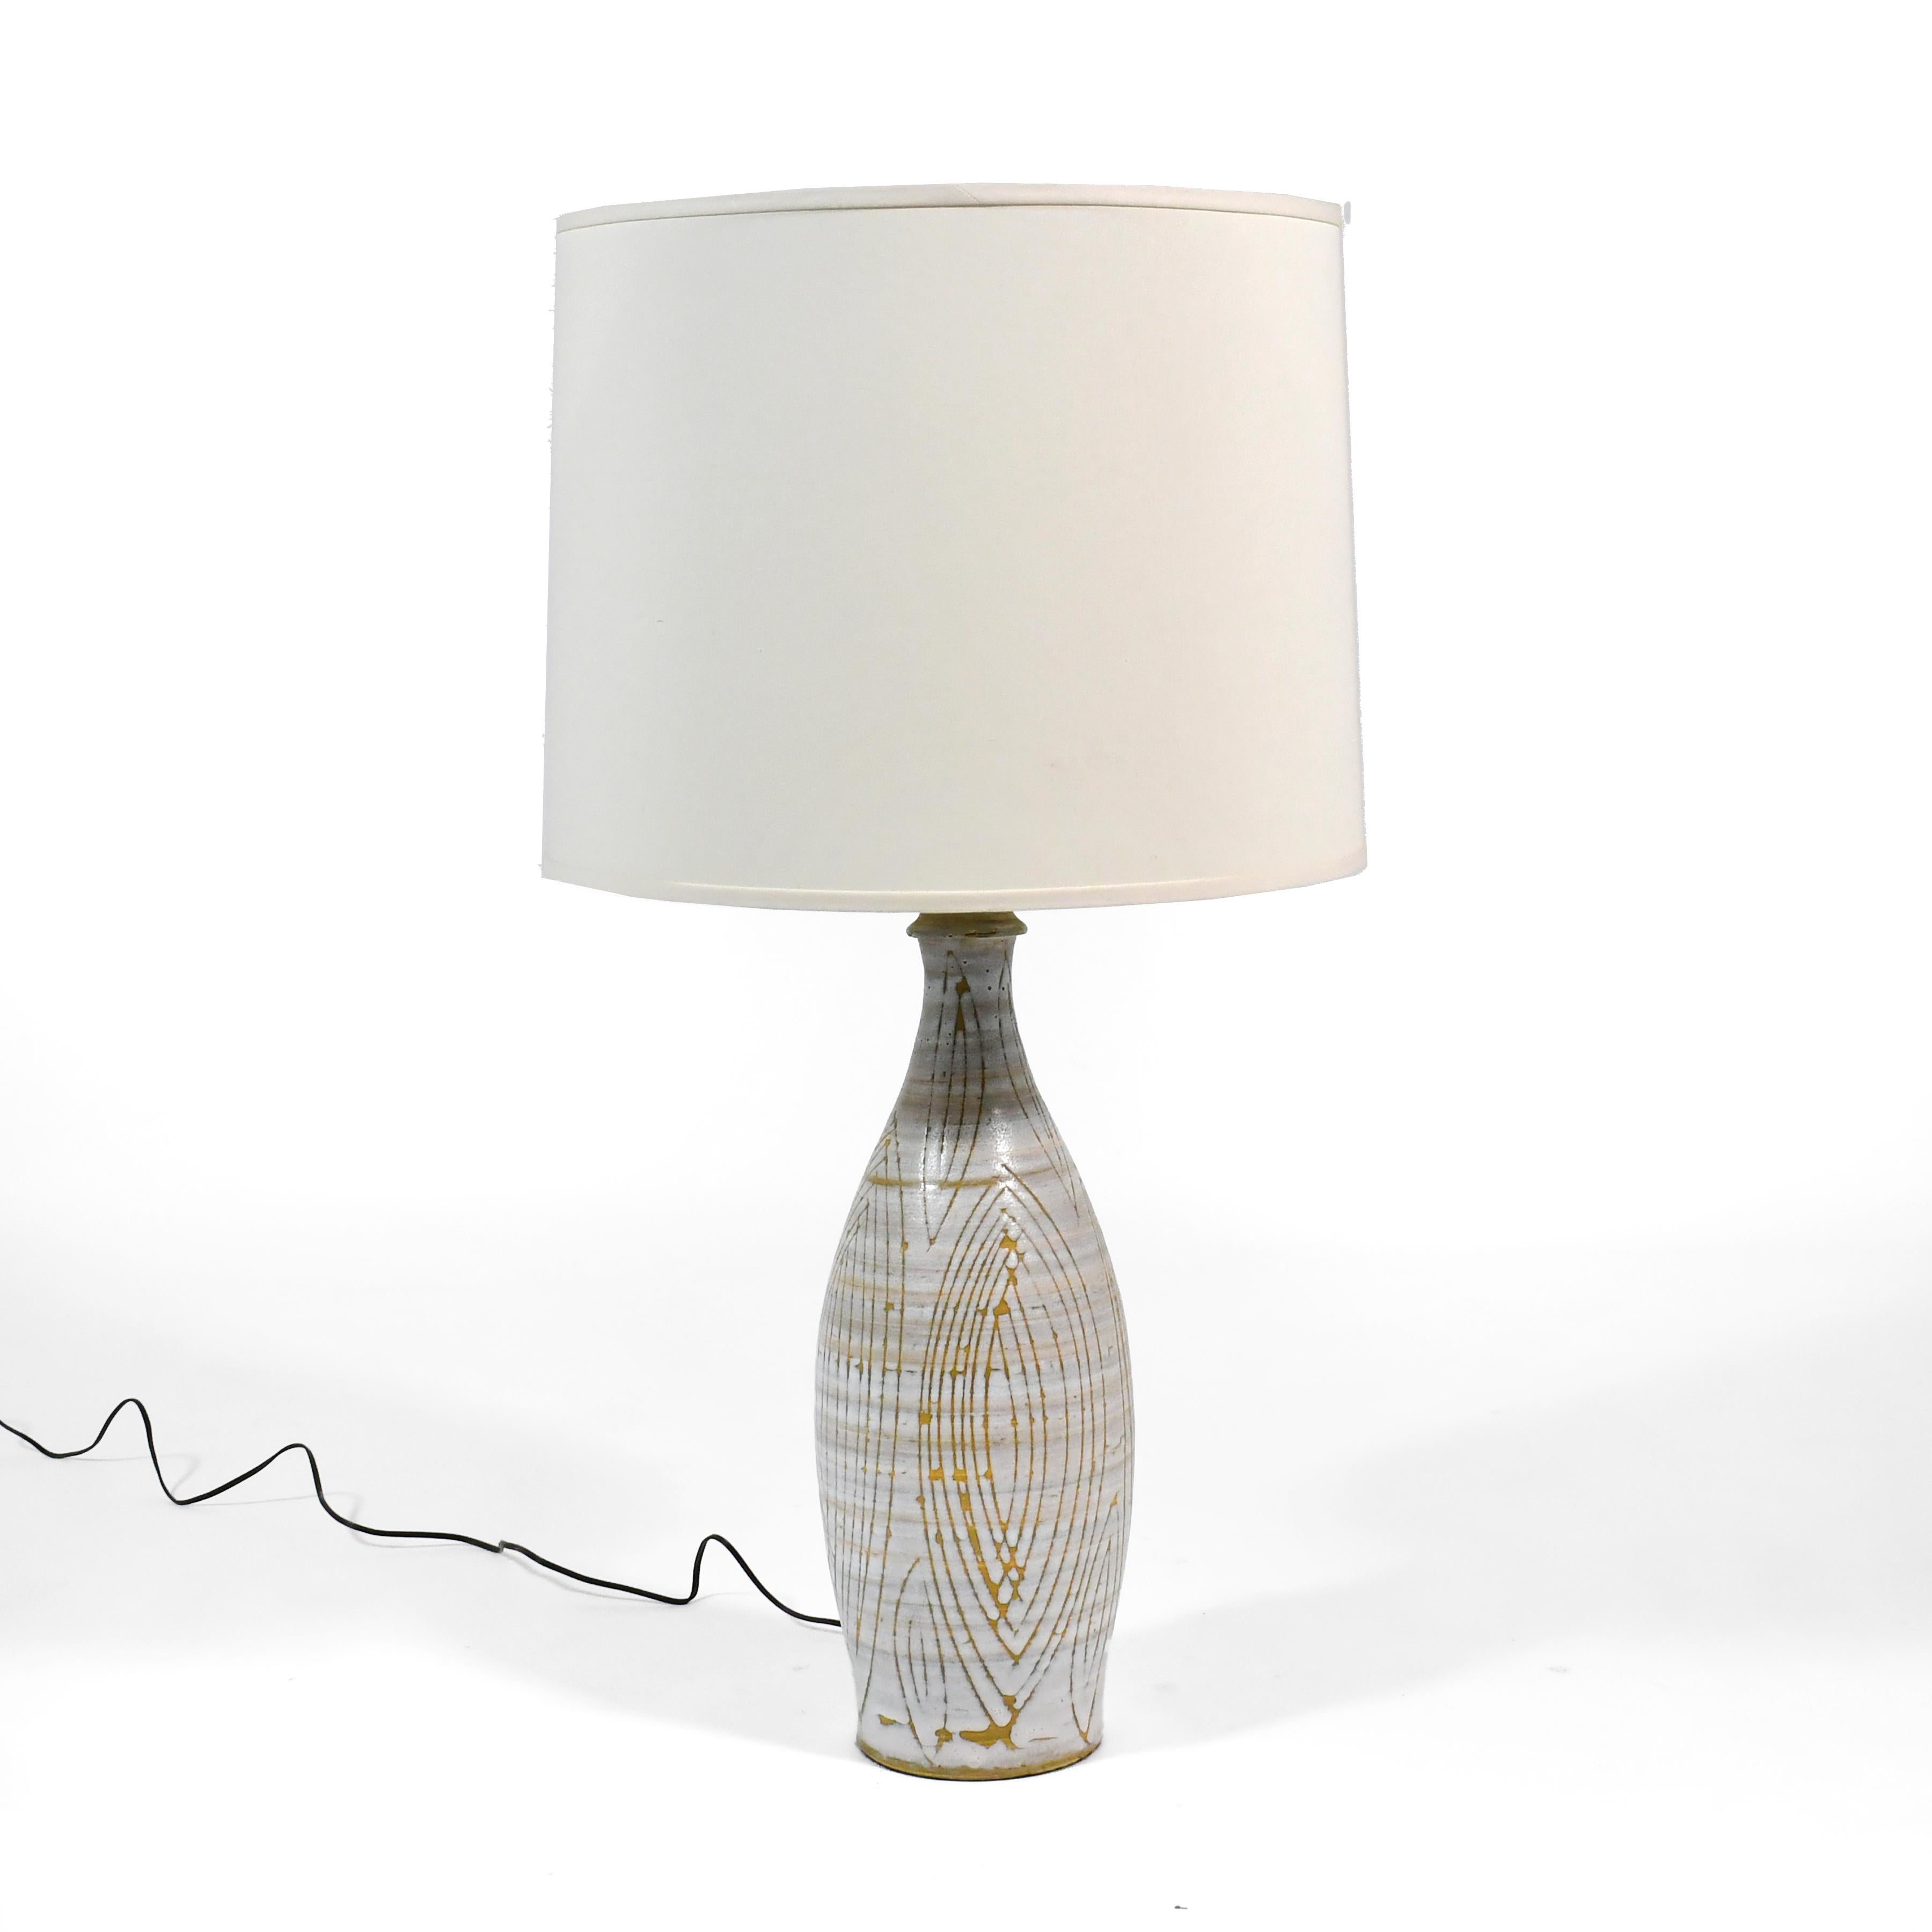 This strikingly beautiful lamp has a base of ceramic decorated with a ivory glaze that has an all-over sgraffito design. The combination of the shape of the lamp body and the hand-applied pattern makes the subtle elements work together to great